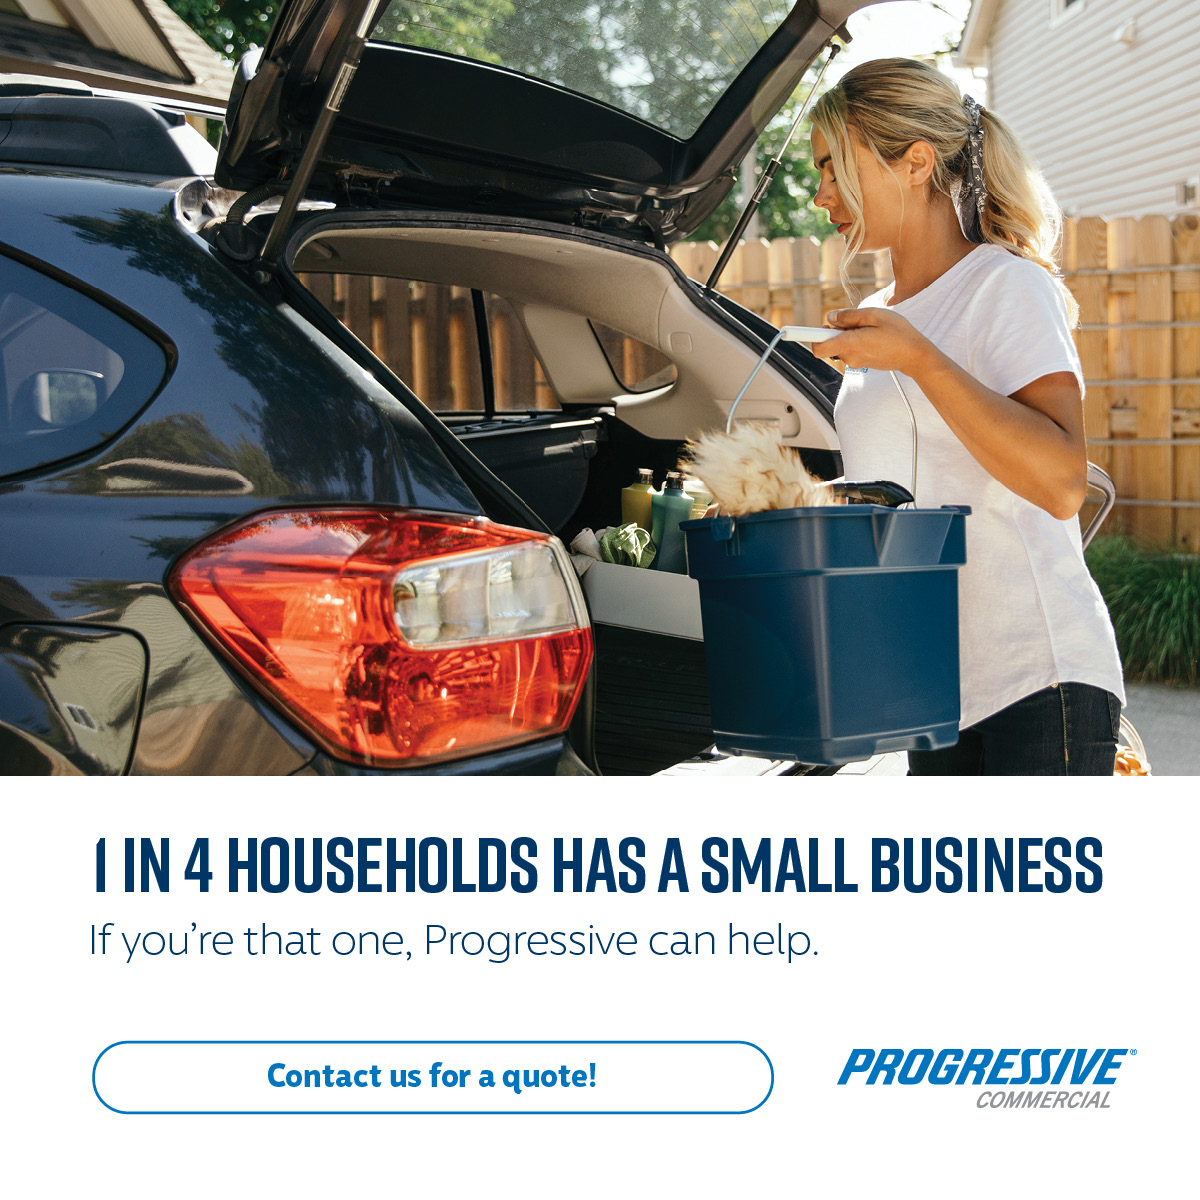 With 1 in 4 households having a small business, we’re here for you! Ask us about Progressive Commercial insurance today. 

#pgragent #smallbusiness #needcommercialauto #commercialauto #insurance #best #broker #1stChoiceInsuranceBrokers